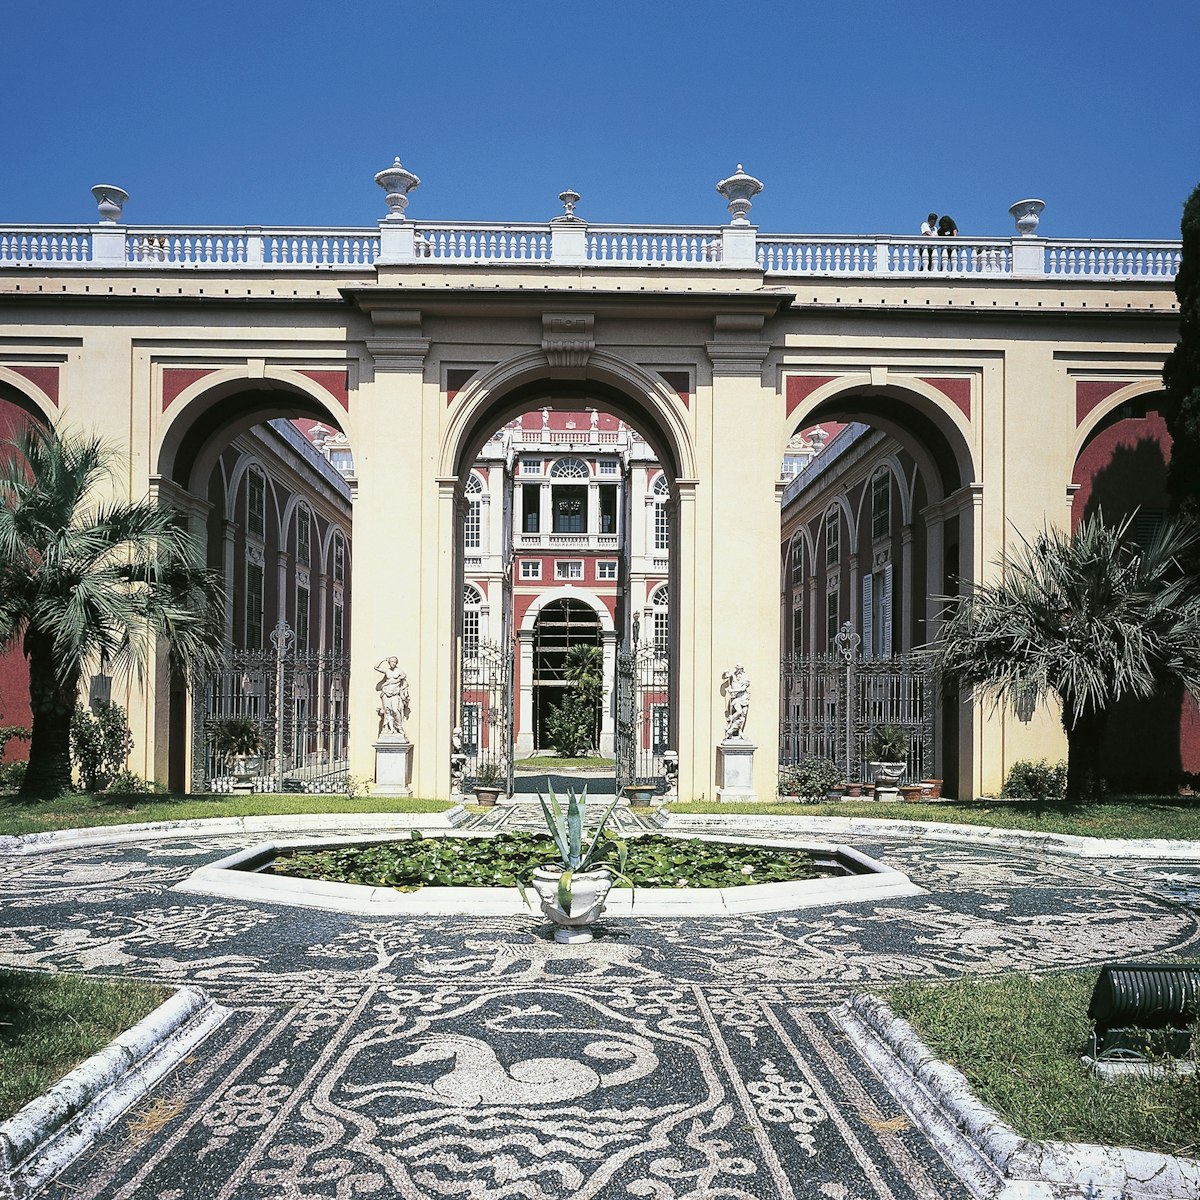 Roof garden of the Royal Palace (Palazzo Reale) (UNESCO World Heritage List, 2006), Genoa. Italy, 17th century.